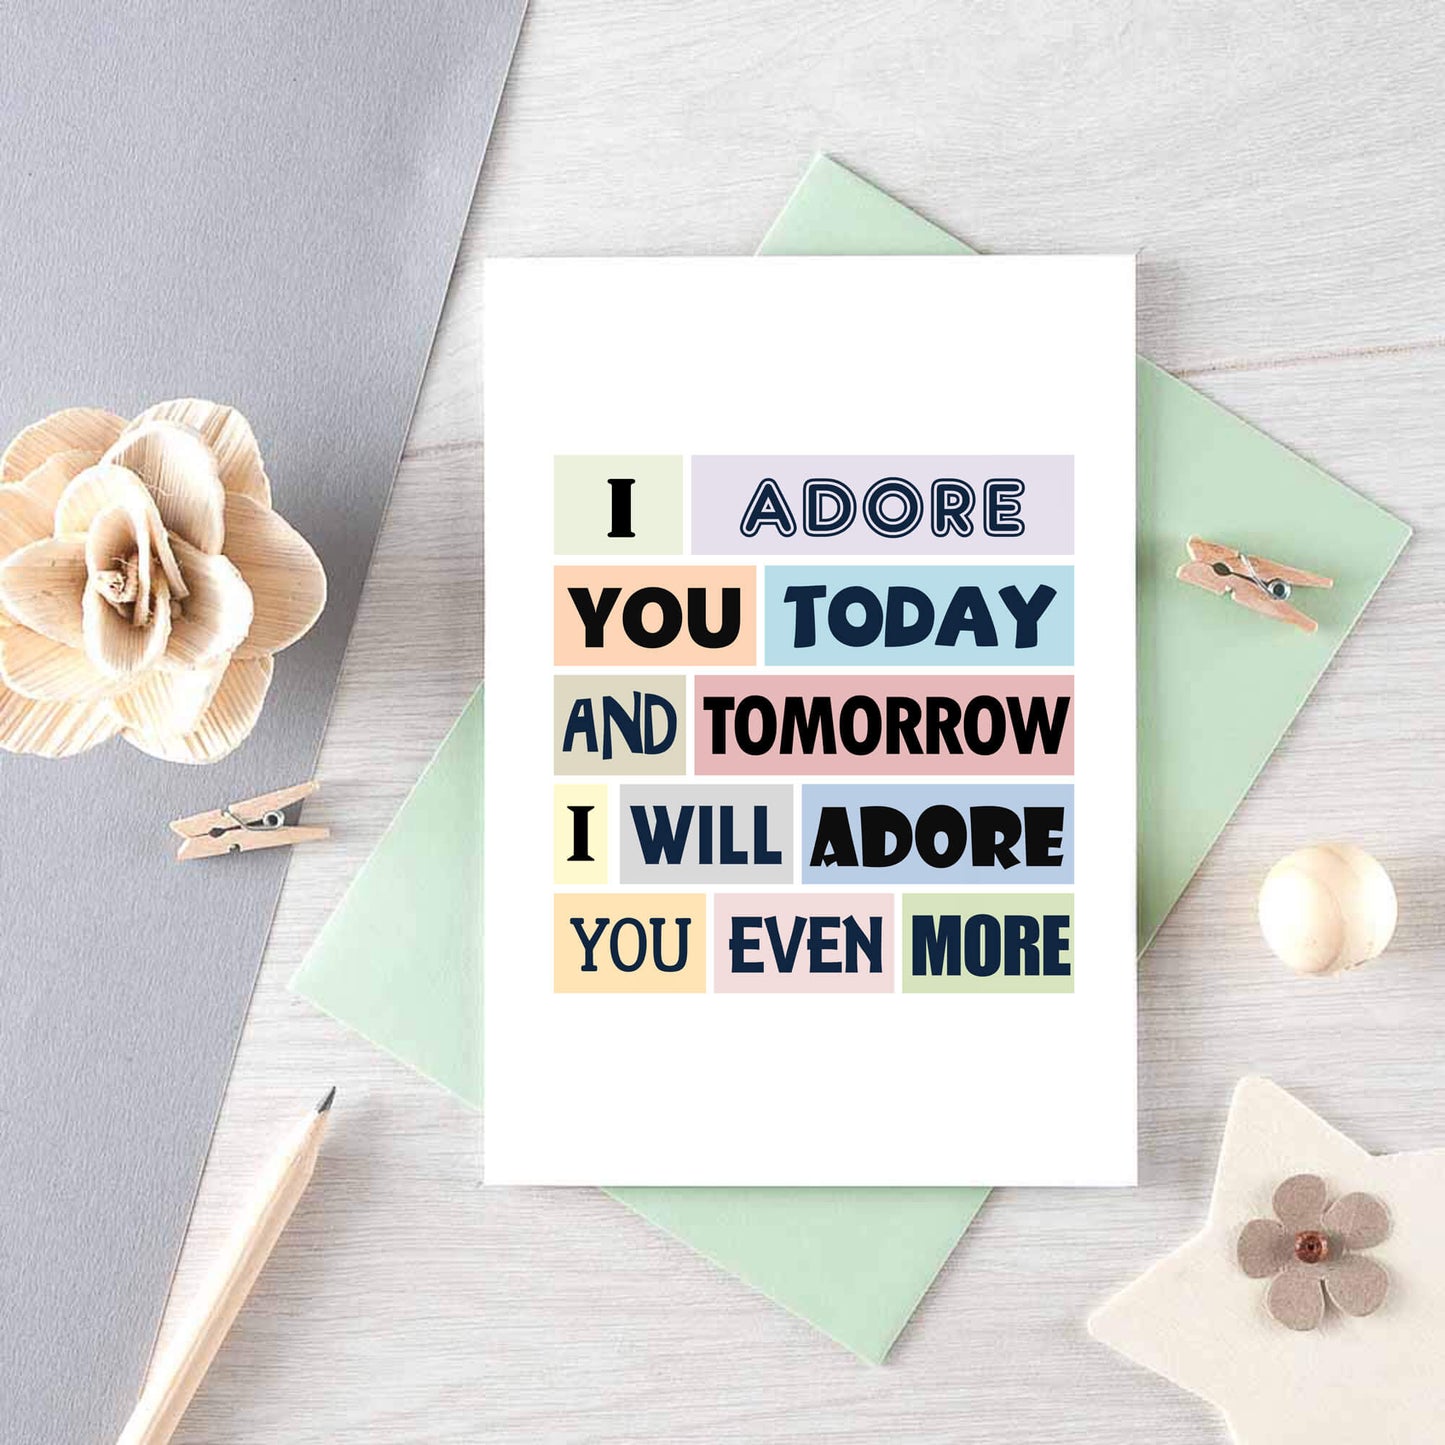 Love Card by SixElevenCreations. Reads I adore you today and tomorrow I will adore you even more. Product Code SE0150A6